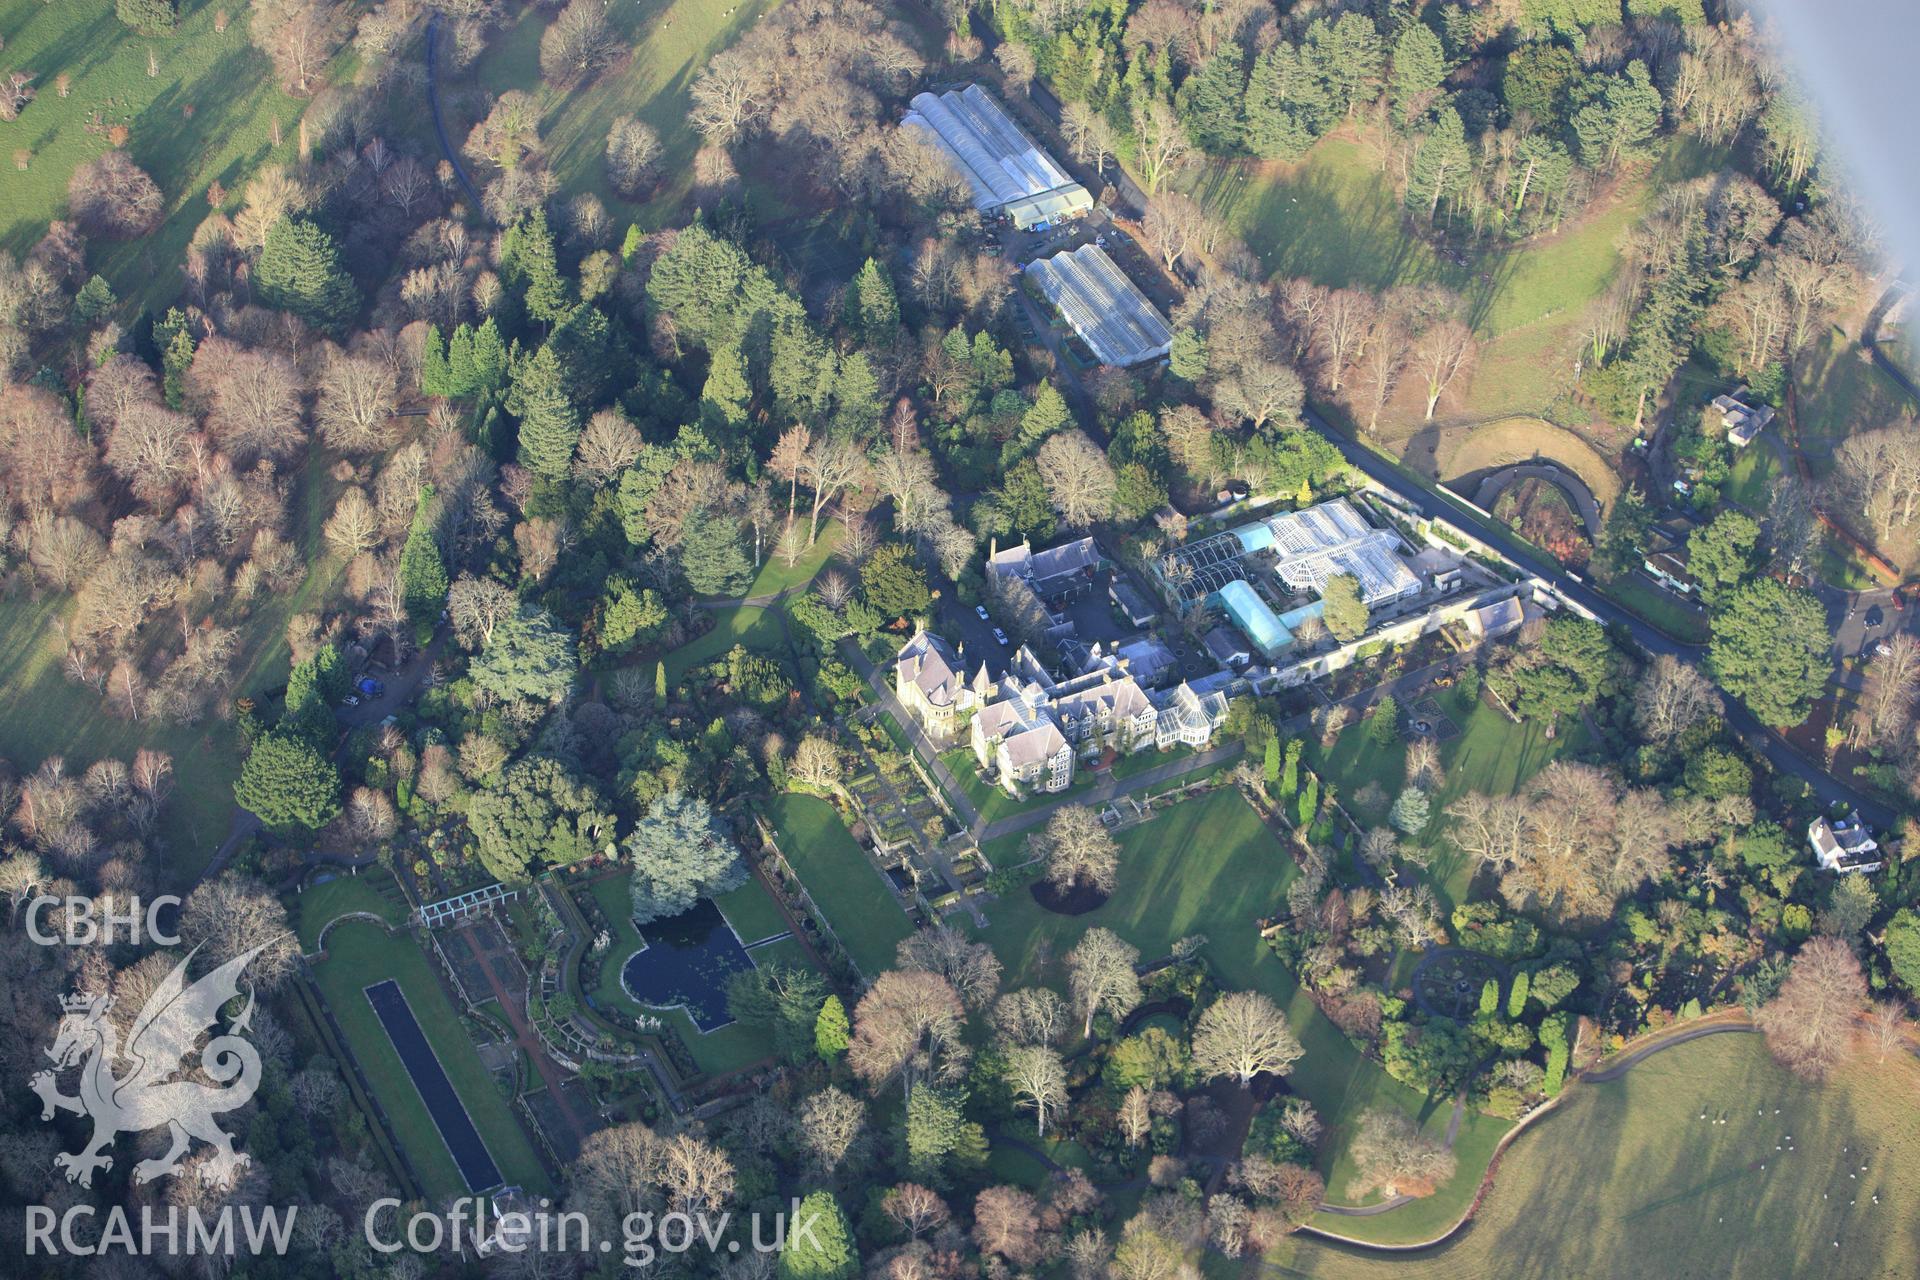 RCAHMW colour oblique aerial photograph of Bodnant House, Tal-y-Cafn. Taken on 10 December 2009 by Toby Driver